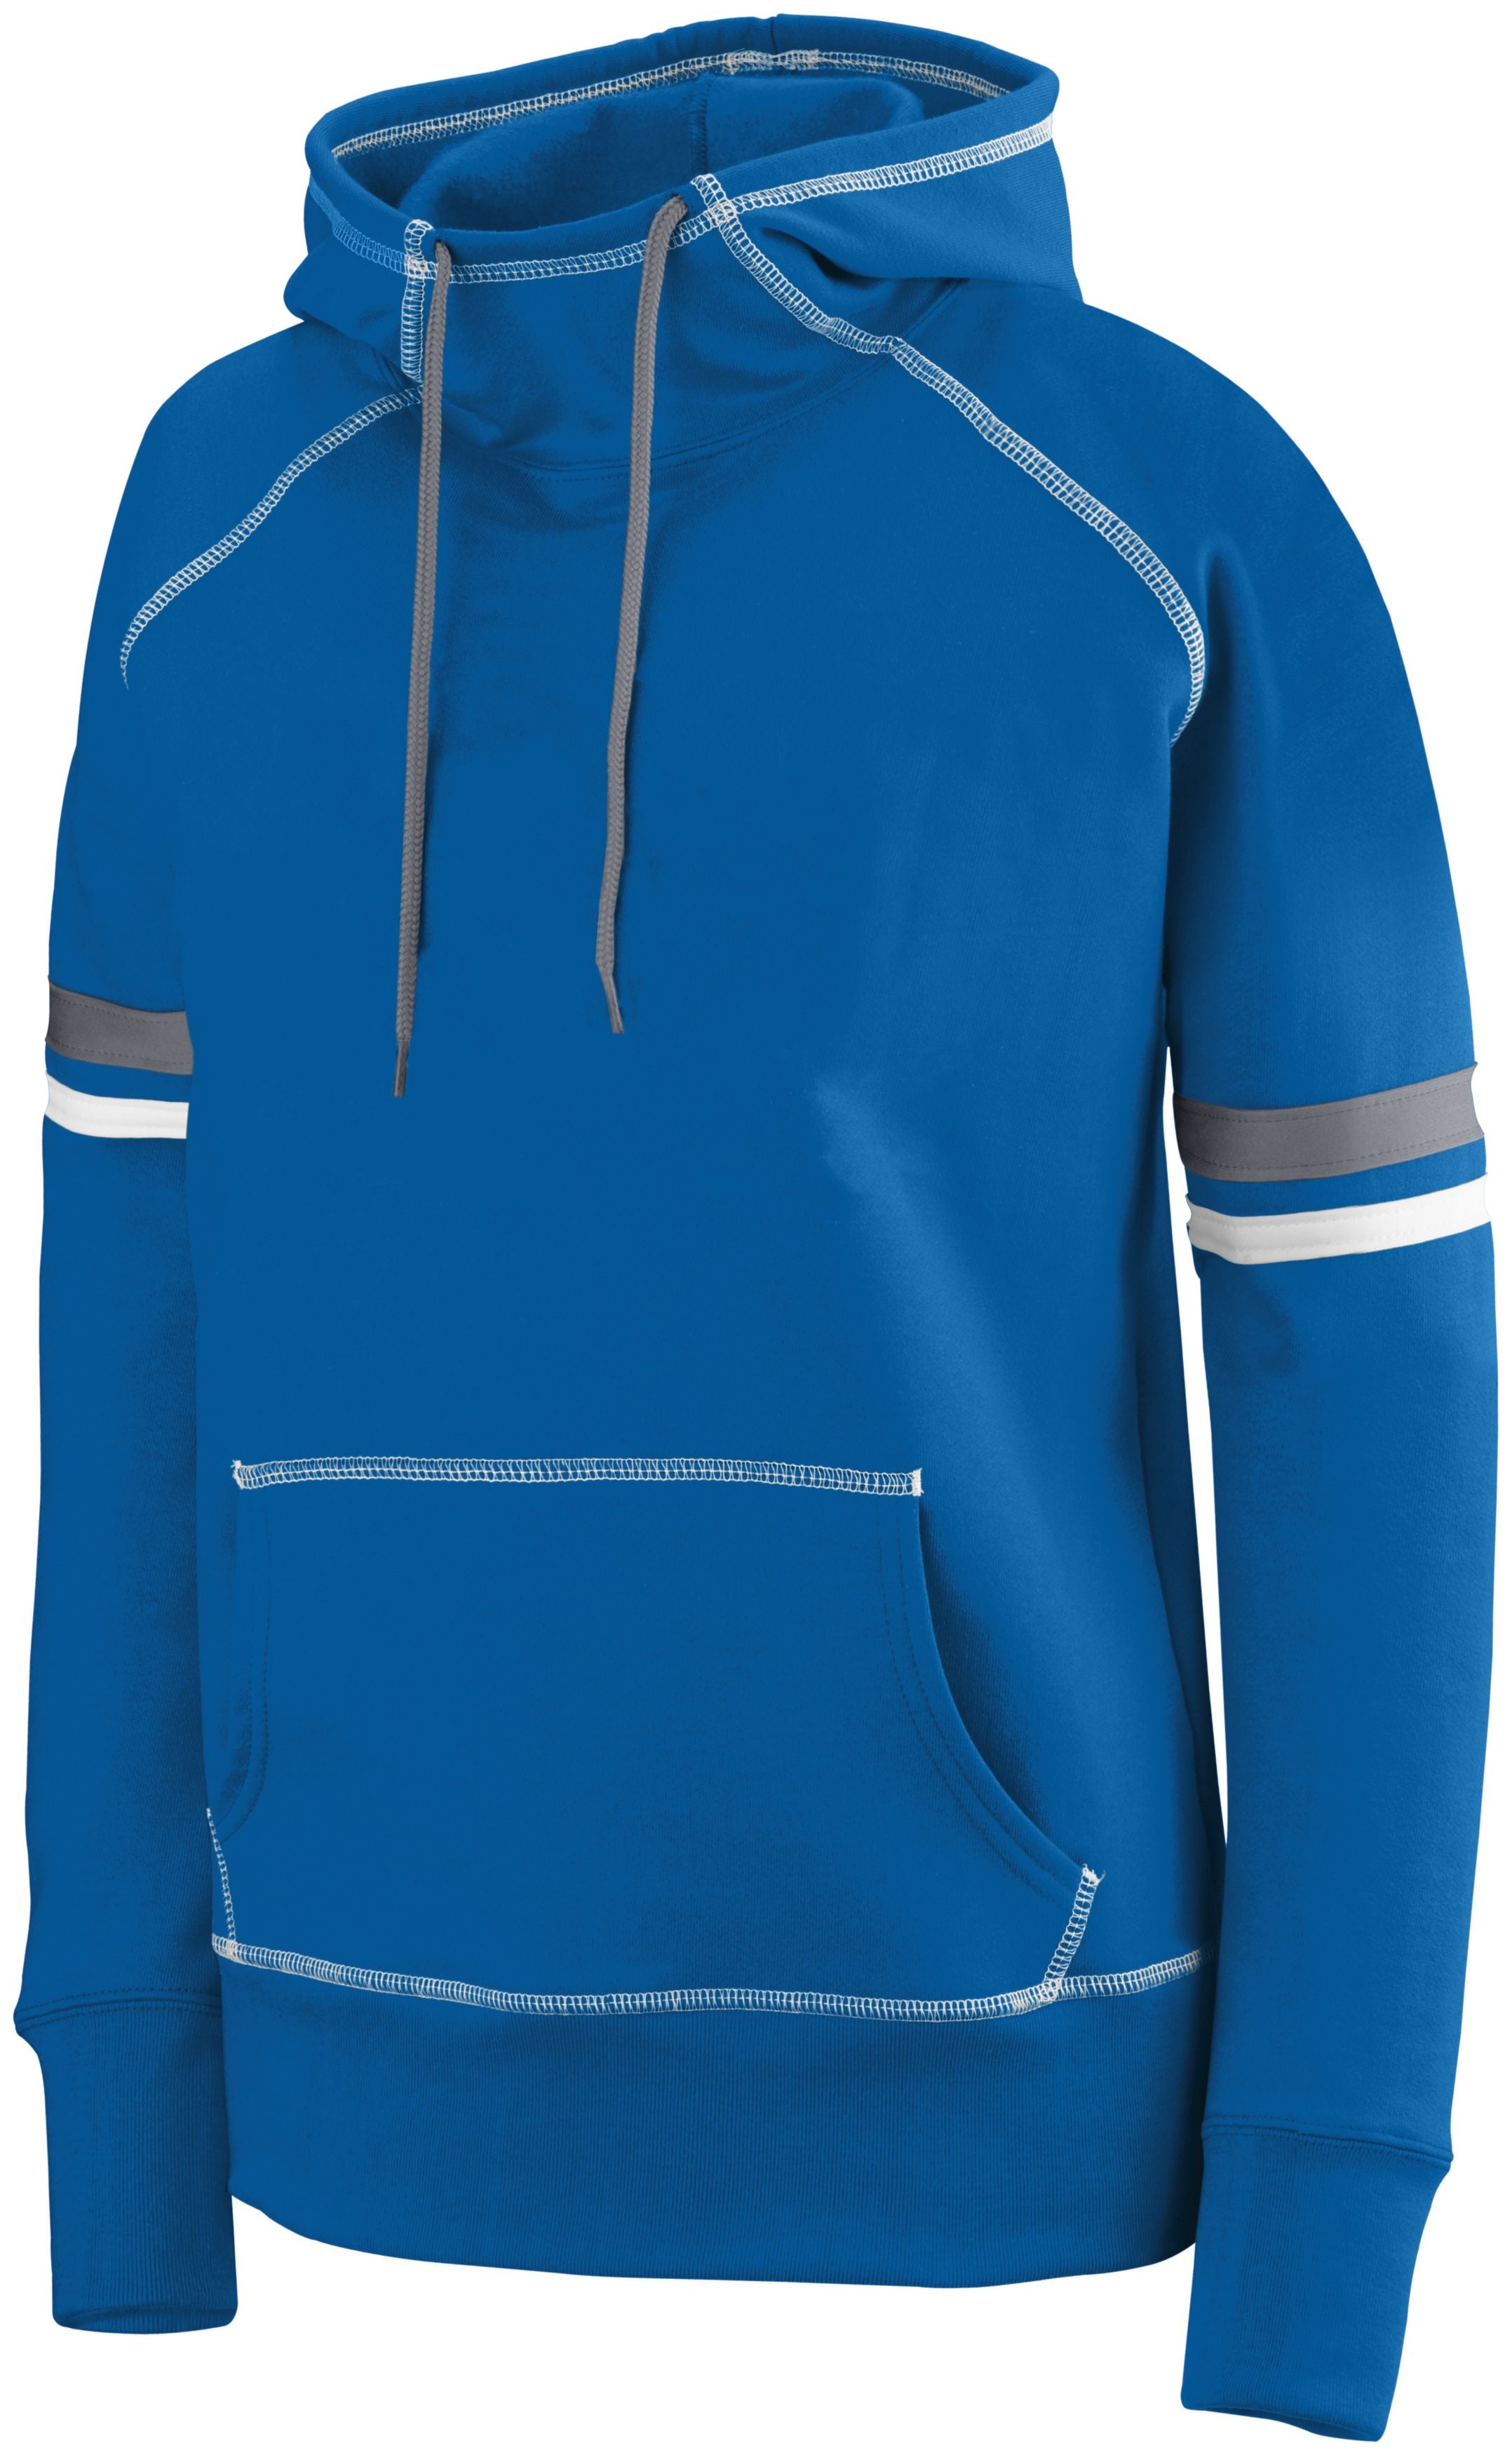 Augusta Sportswear Girls Spry Hoodie in Royal/White/Graphite  -Part of the Girls, Hoodies, Augusta-Products, Girls-Hoodie product lines at KanaleyCreations.com